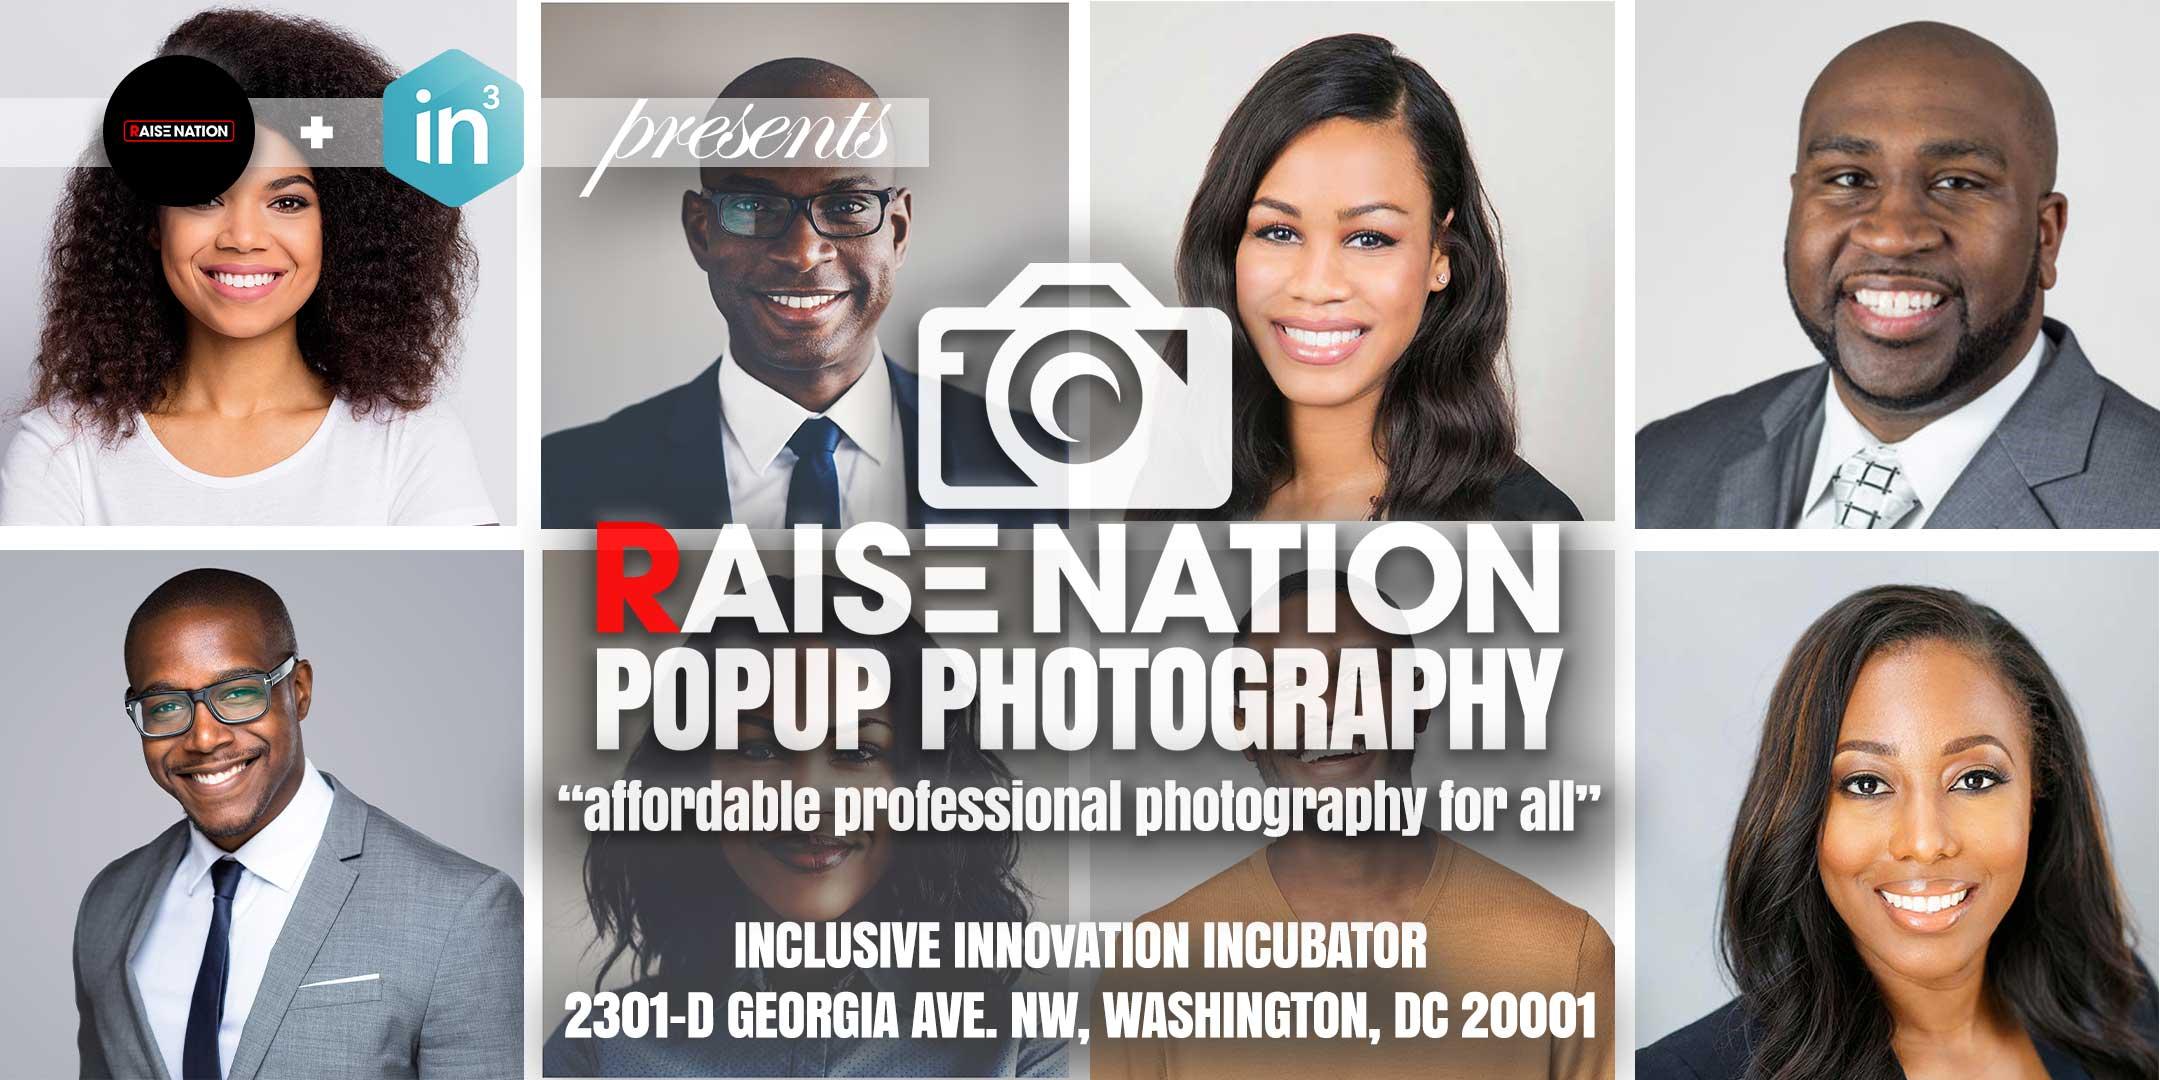 PopUp Photoshoot (Affordable Professional Photography) by Raise Nation